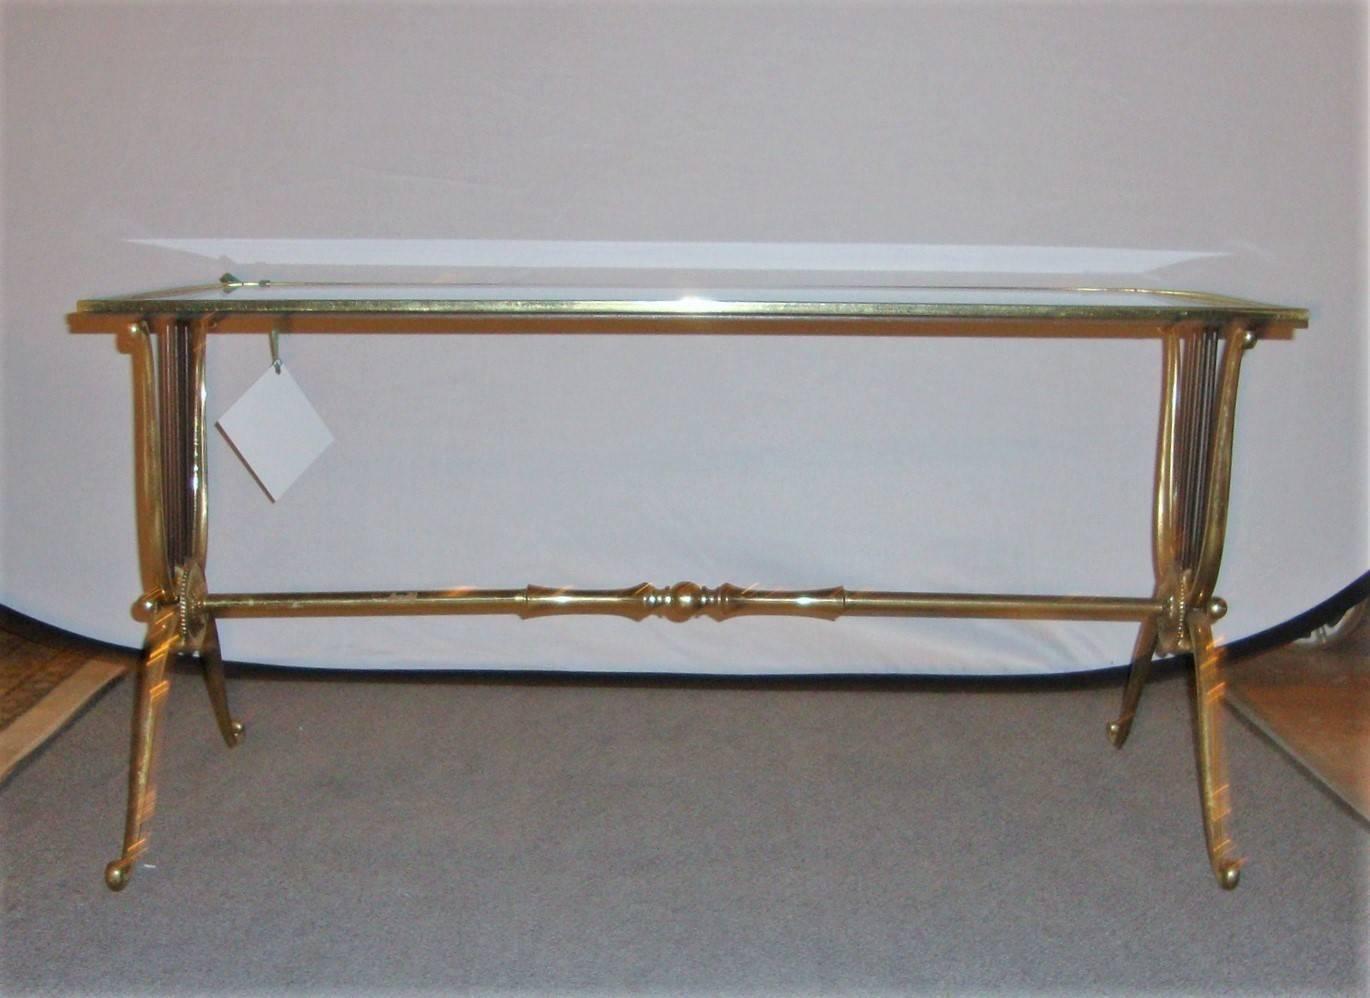 Maison Baguès bronze coffee table. Glass top with bronze base with base having harp shaped supports with Floret Centers. Piedmont style legs with scrolled feet.